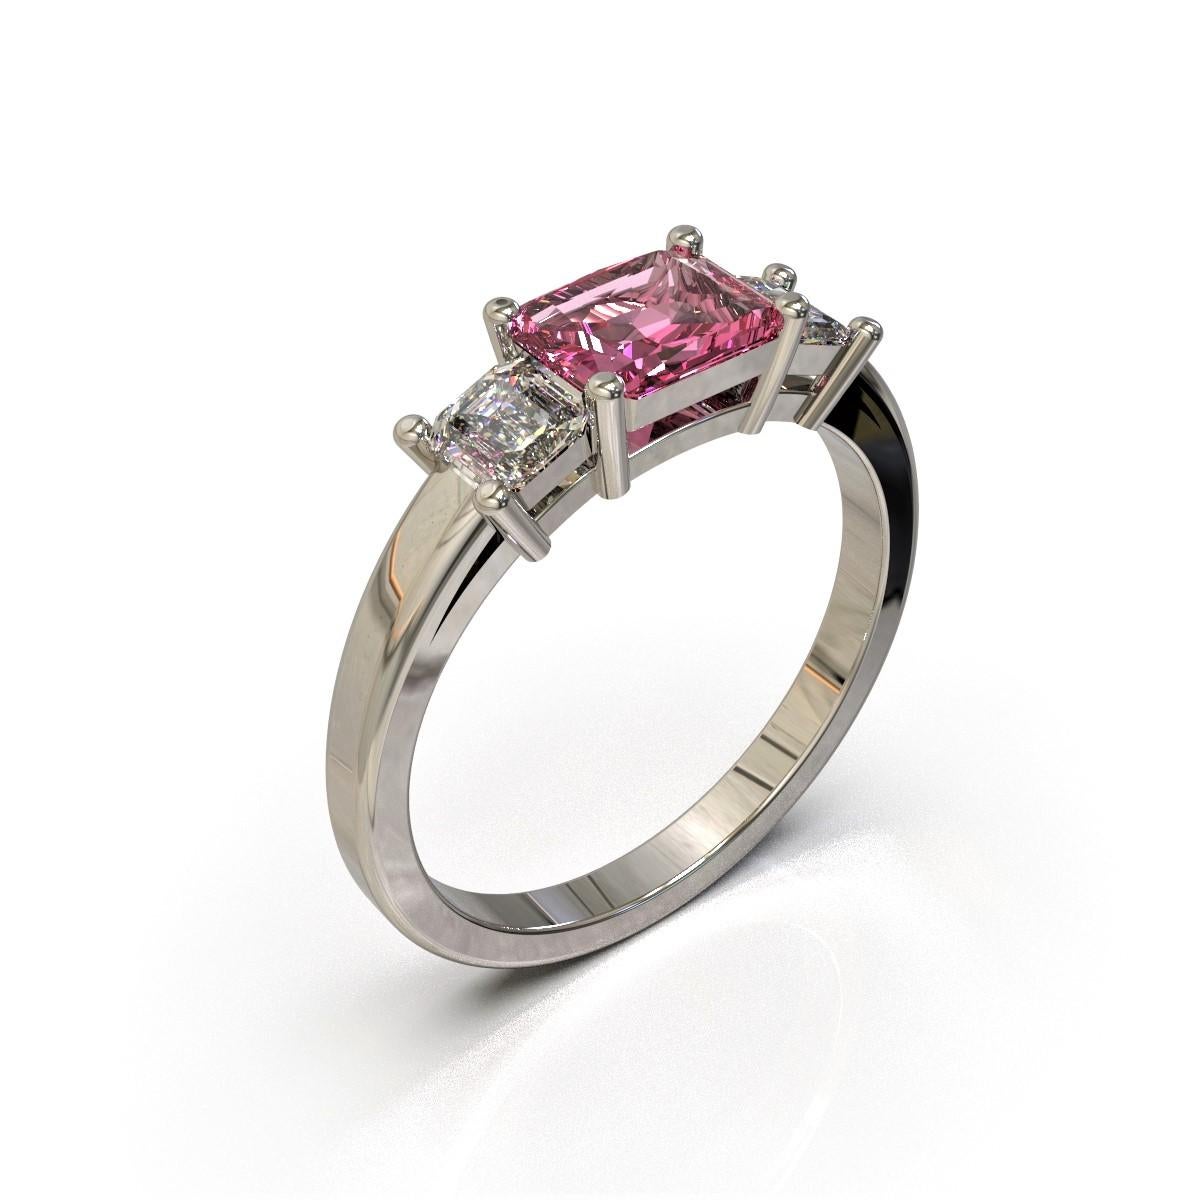 Rosa Zaffiro Diamante Ring

This gorgeous heirloom style platinum ring is set with a stunning pink sapphire and pair of white diamonds in platinum settings.

Radiant cut sapphire: Vivid medium pink colour, 6.33 x 5.01 x 4.29mm, 2.64ct, please note